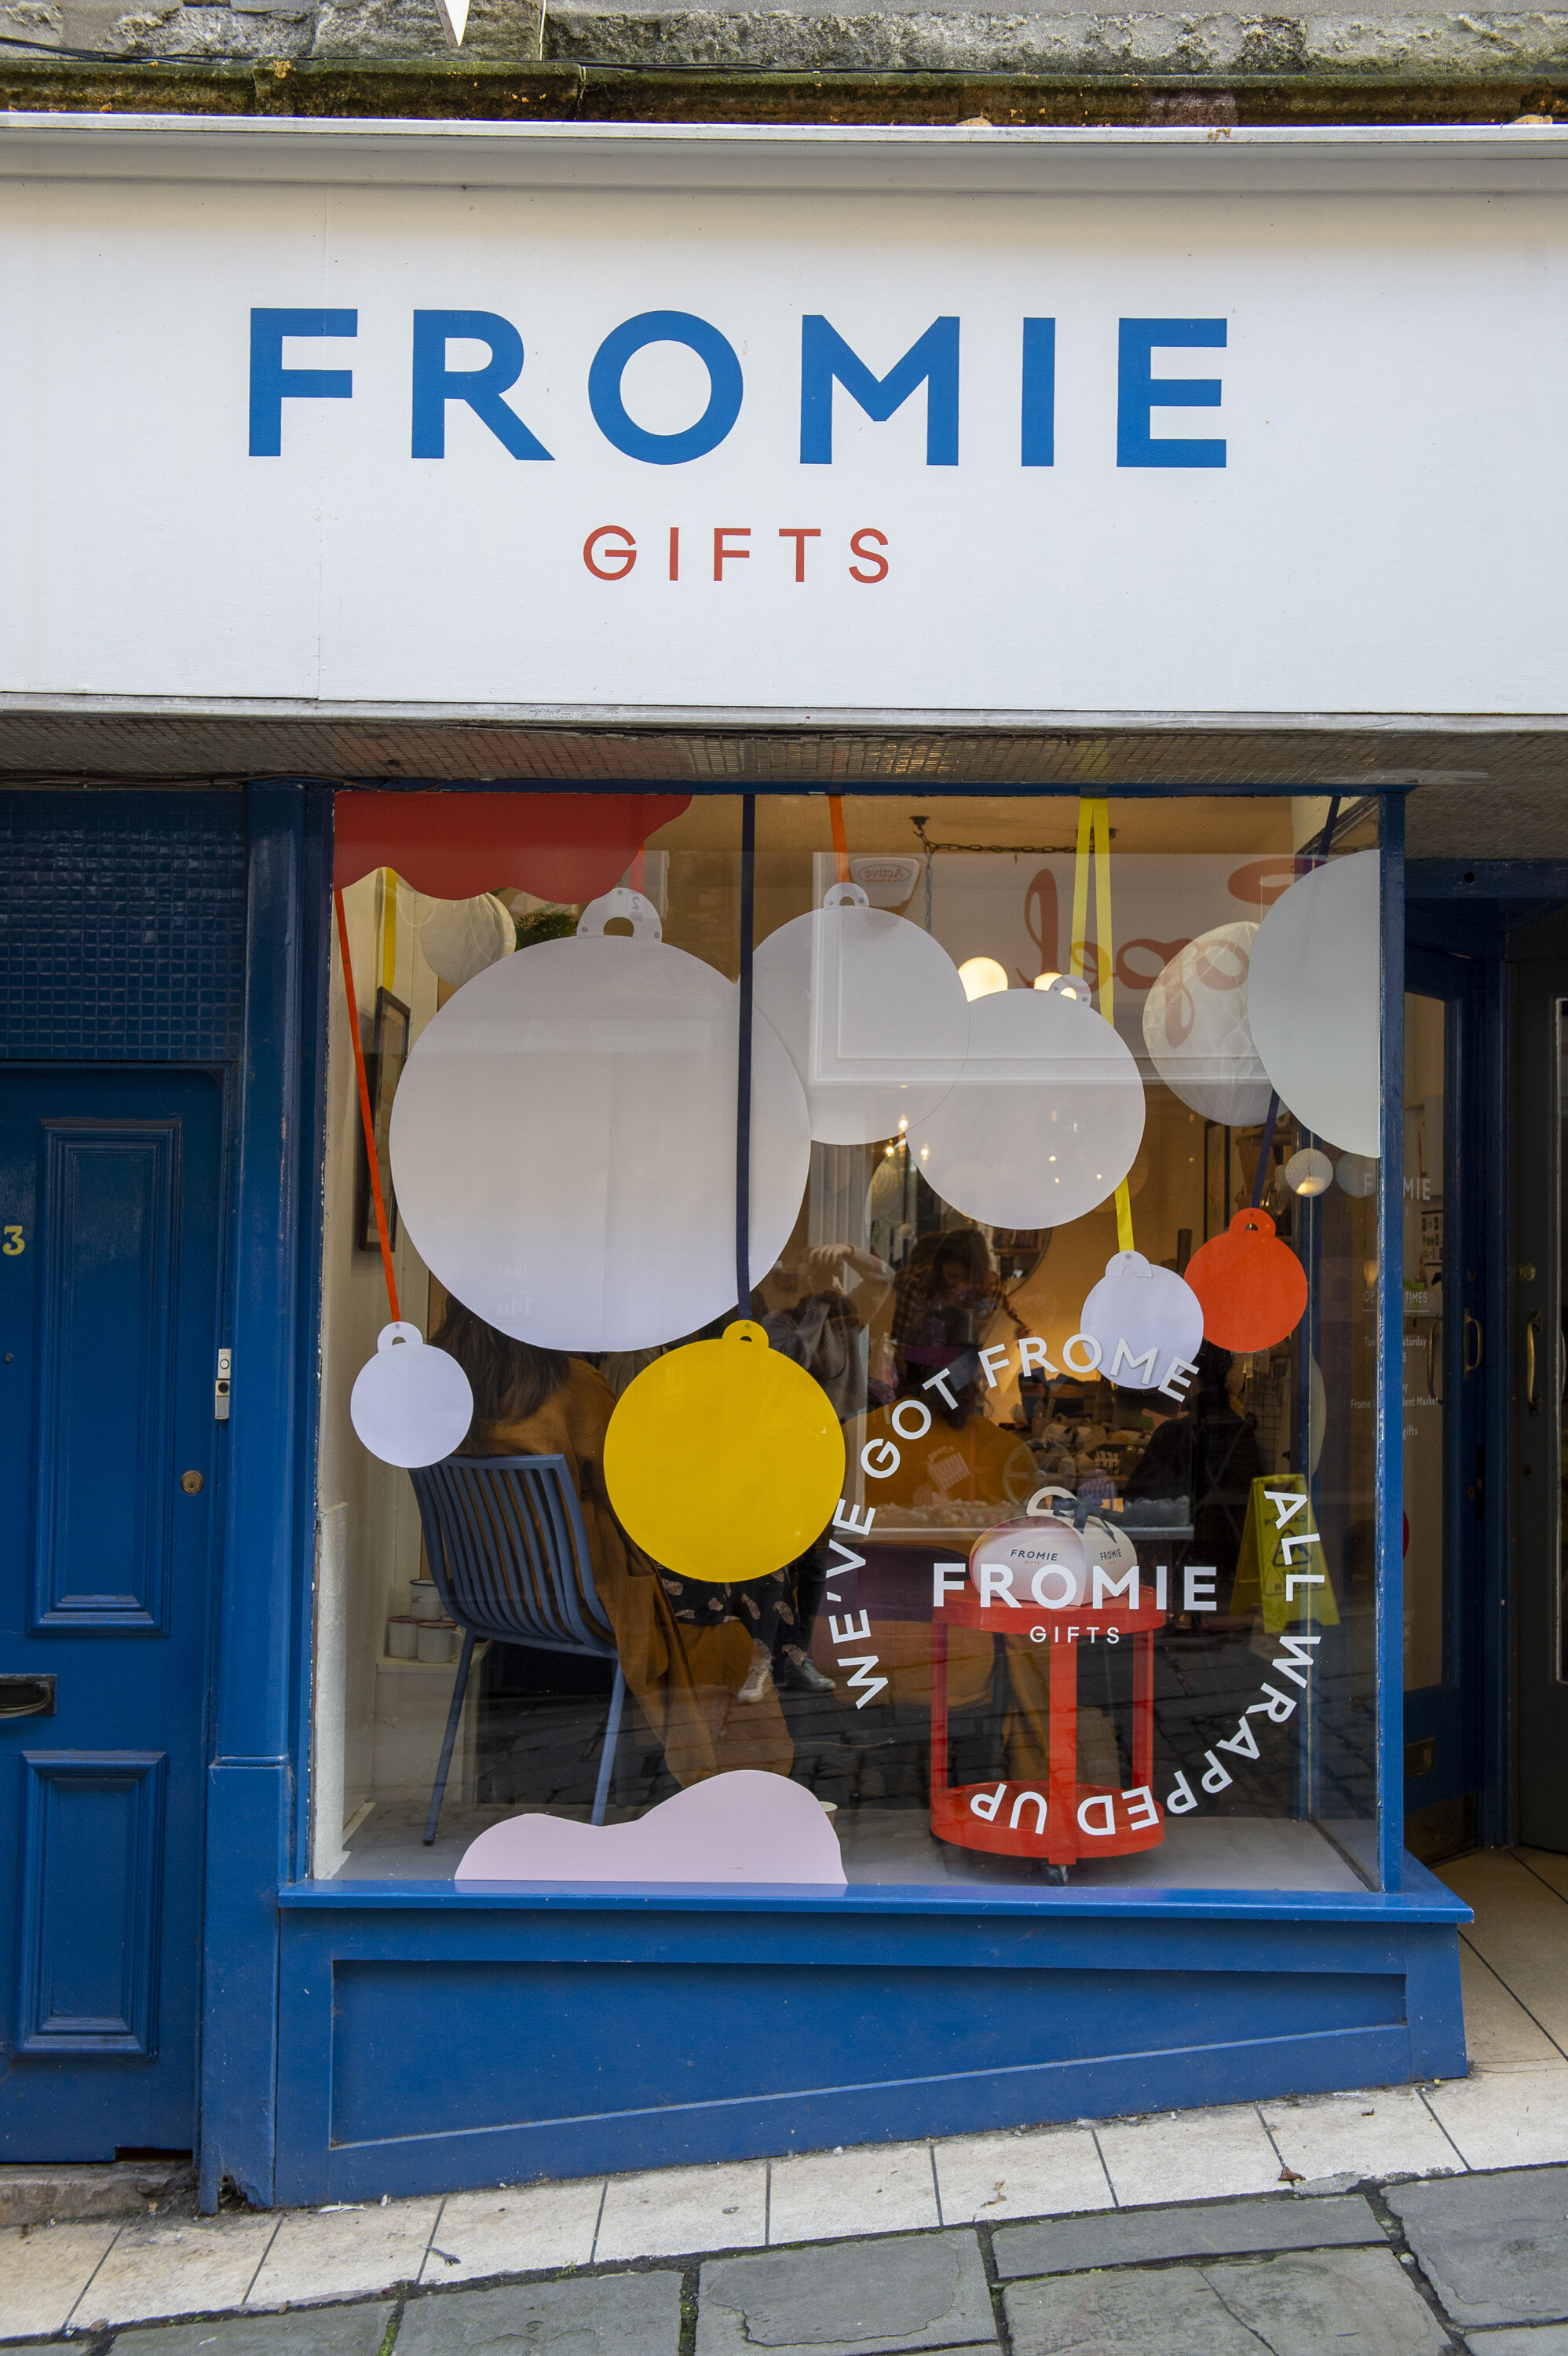 Fromie Gifts, Frome - 91 Magazine Seek Inspire Create event